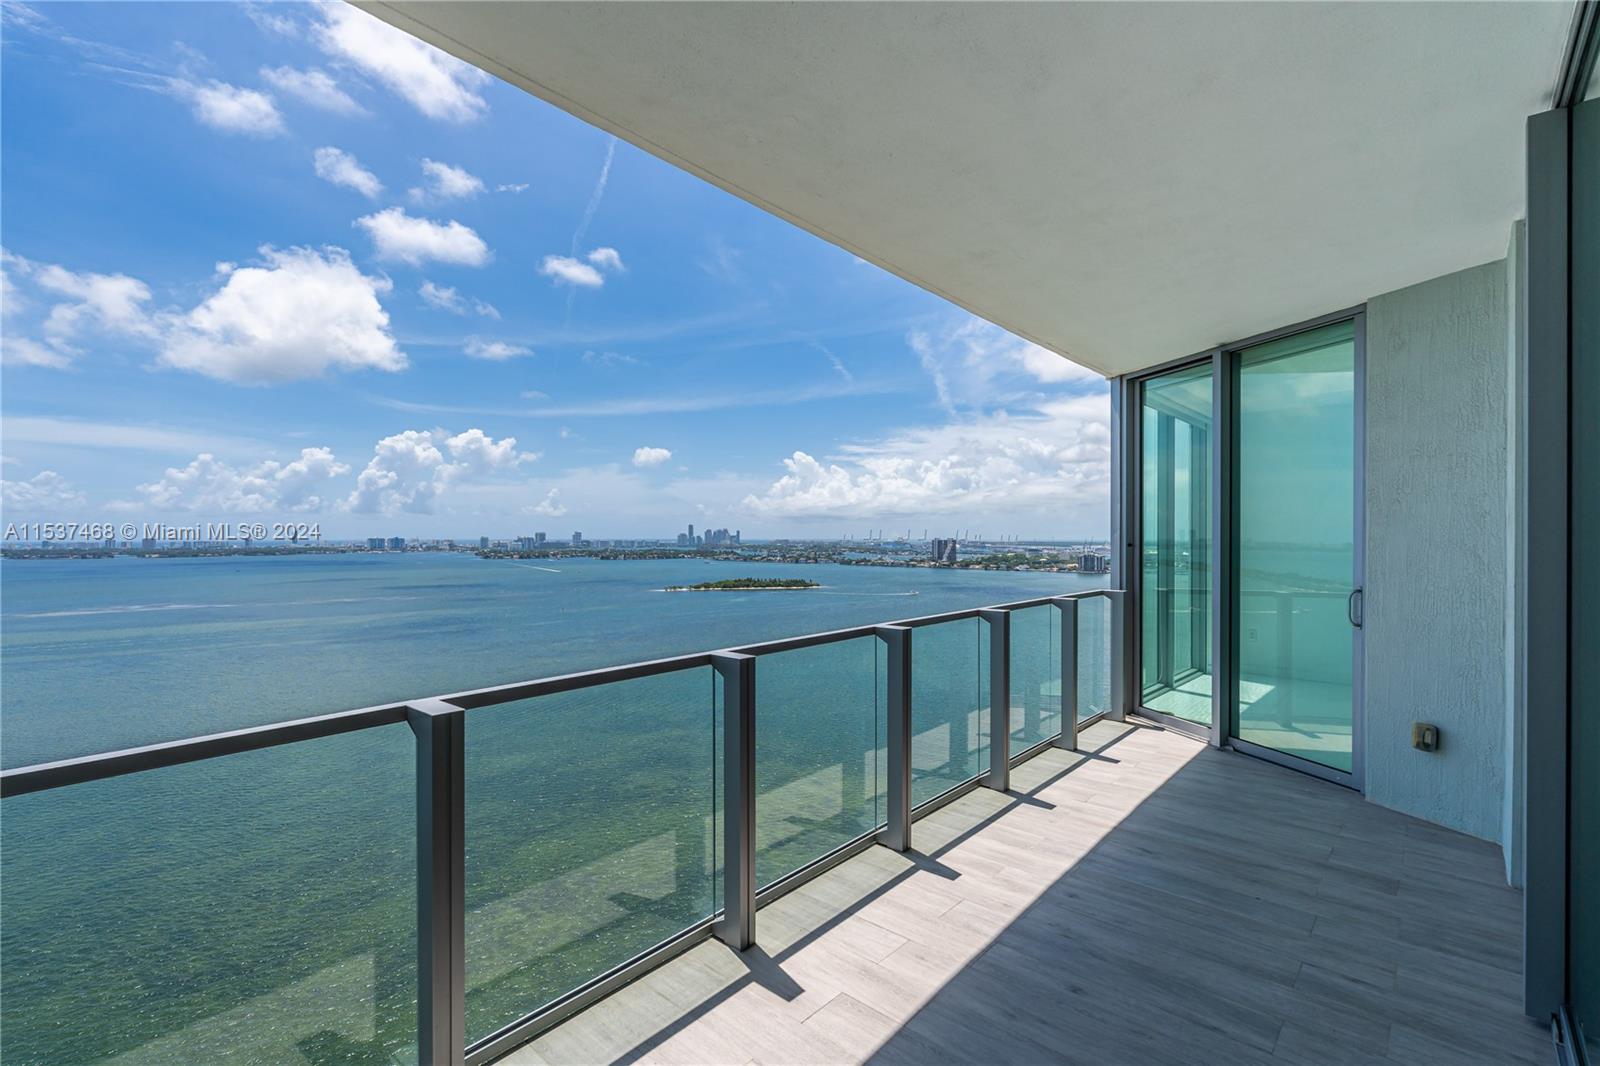 Experience breathtaking open water views every day from the 26th floor at Biscayne Beach! Upon exiting the elevator, you step into your private foyer before entering this impeccably appointed 2-bedroom, 2.5-bathroom modern apartment. The 04 line is one of the most sought-after layouts for a 2-bedroom residence within this Edgewater building completed in 2017. The apartment is upgraded
with built-out walk-in closets, Miele appliances, and window treatments featuring blackout shades. Crafted by the esteemed Thom Filicia, Biscayne Beach's interiors emanate contemporary elegance with a European touch. Embrace the prestigious lifestyle of Biscayne Beach, complete with luxurious amenities including two pools, a spa, sauna, gym, party and game rooms, beach club, tennis and basketball courts!